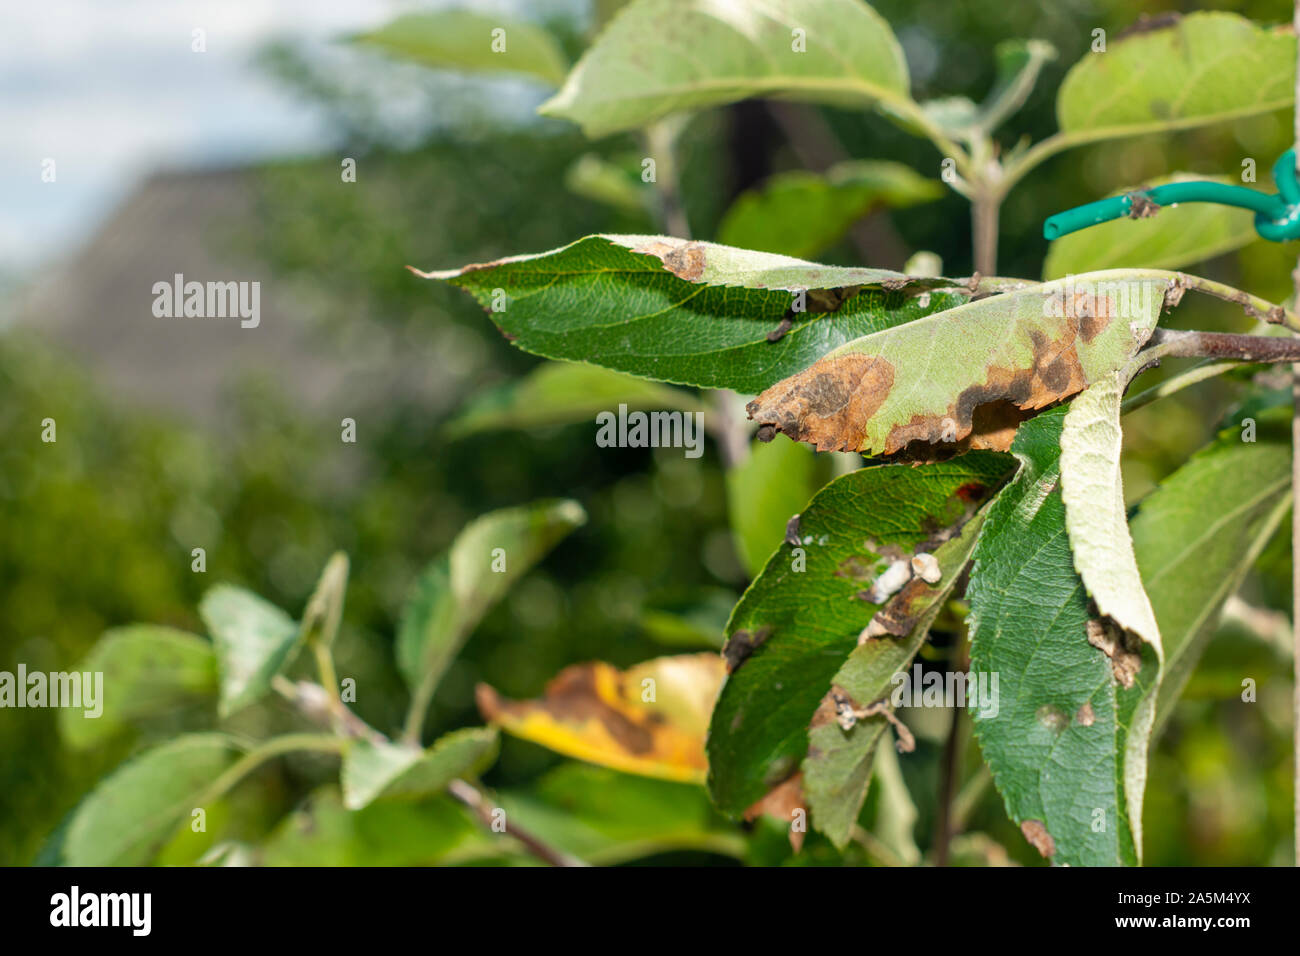 scab on the leaves and fruits of an apple tree close-up. Diseases in the Apple Orchard Stock Photo